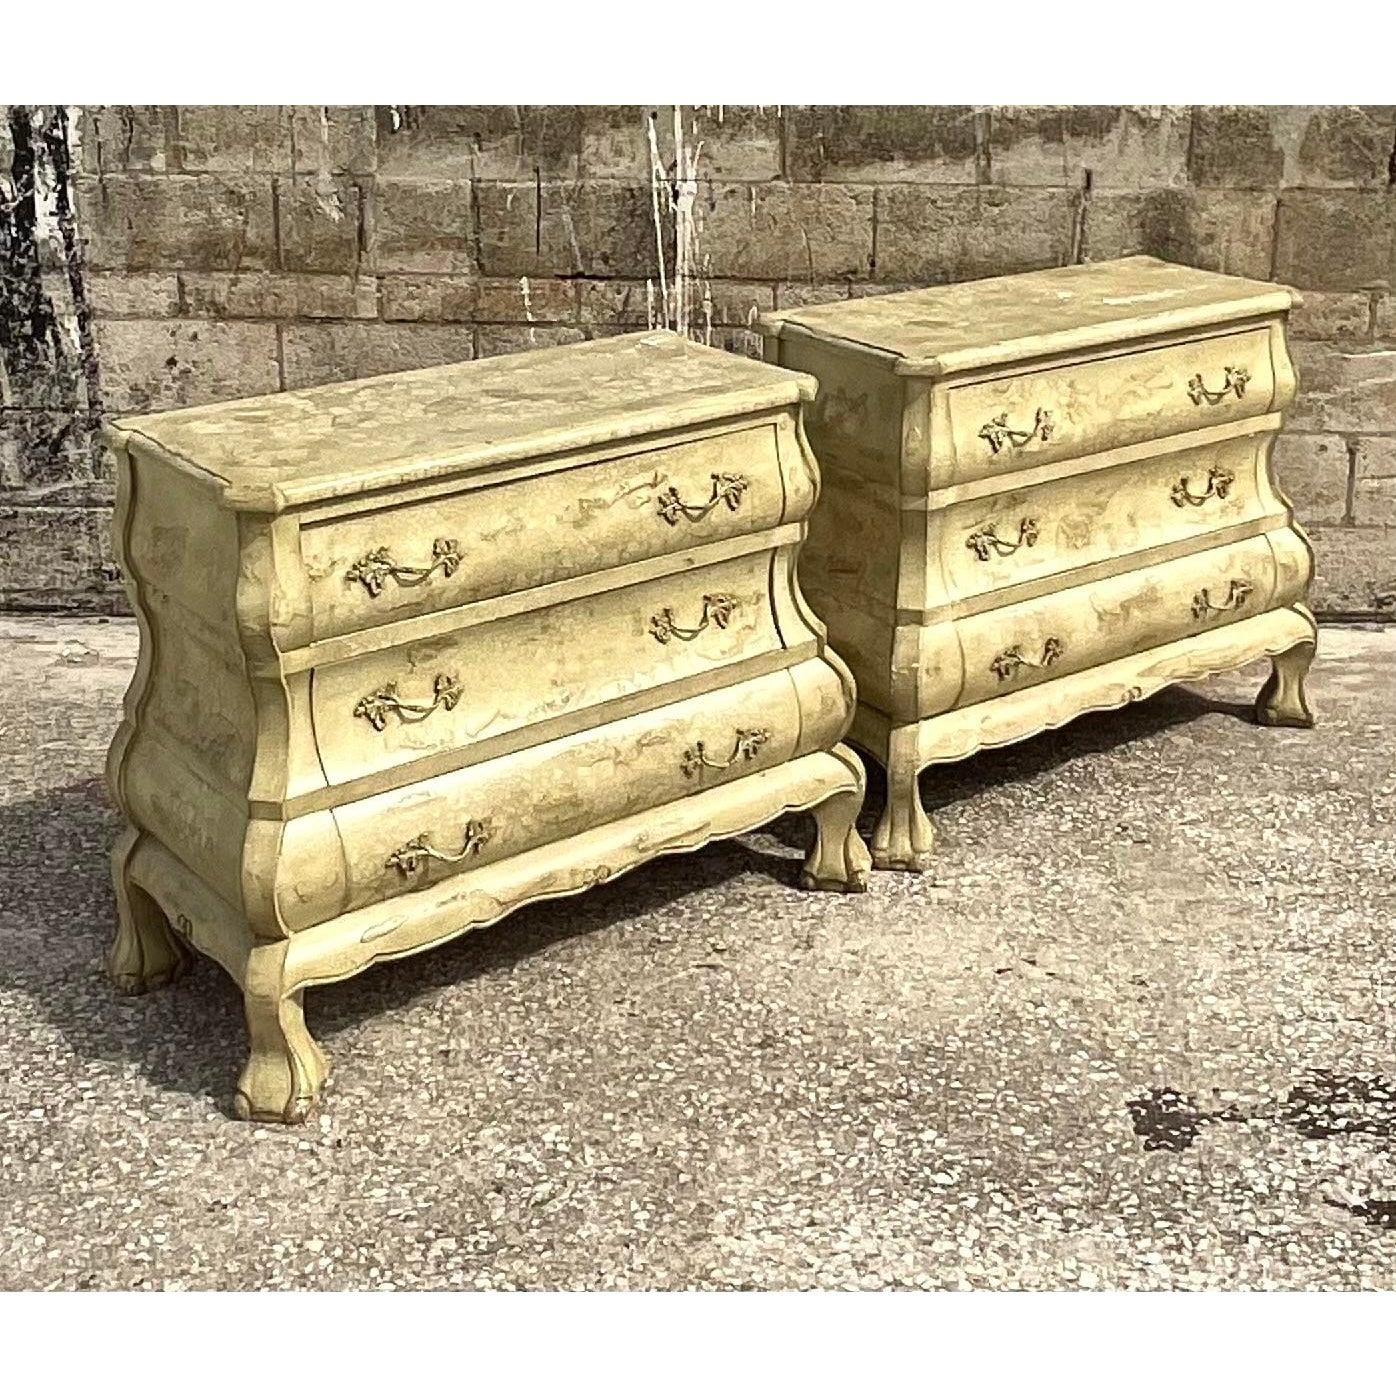 Fantastic pair of vintage French Bombe chests of drawers. Beautiful textured finish in a chic pale green color. Lots of big chunky hardware. Great as chests, but would also be super as nightstands. Acquired from a Palm Beach estate.